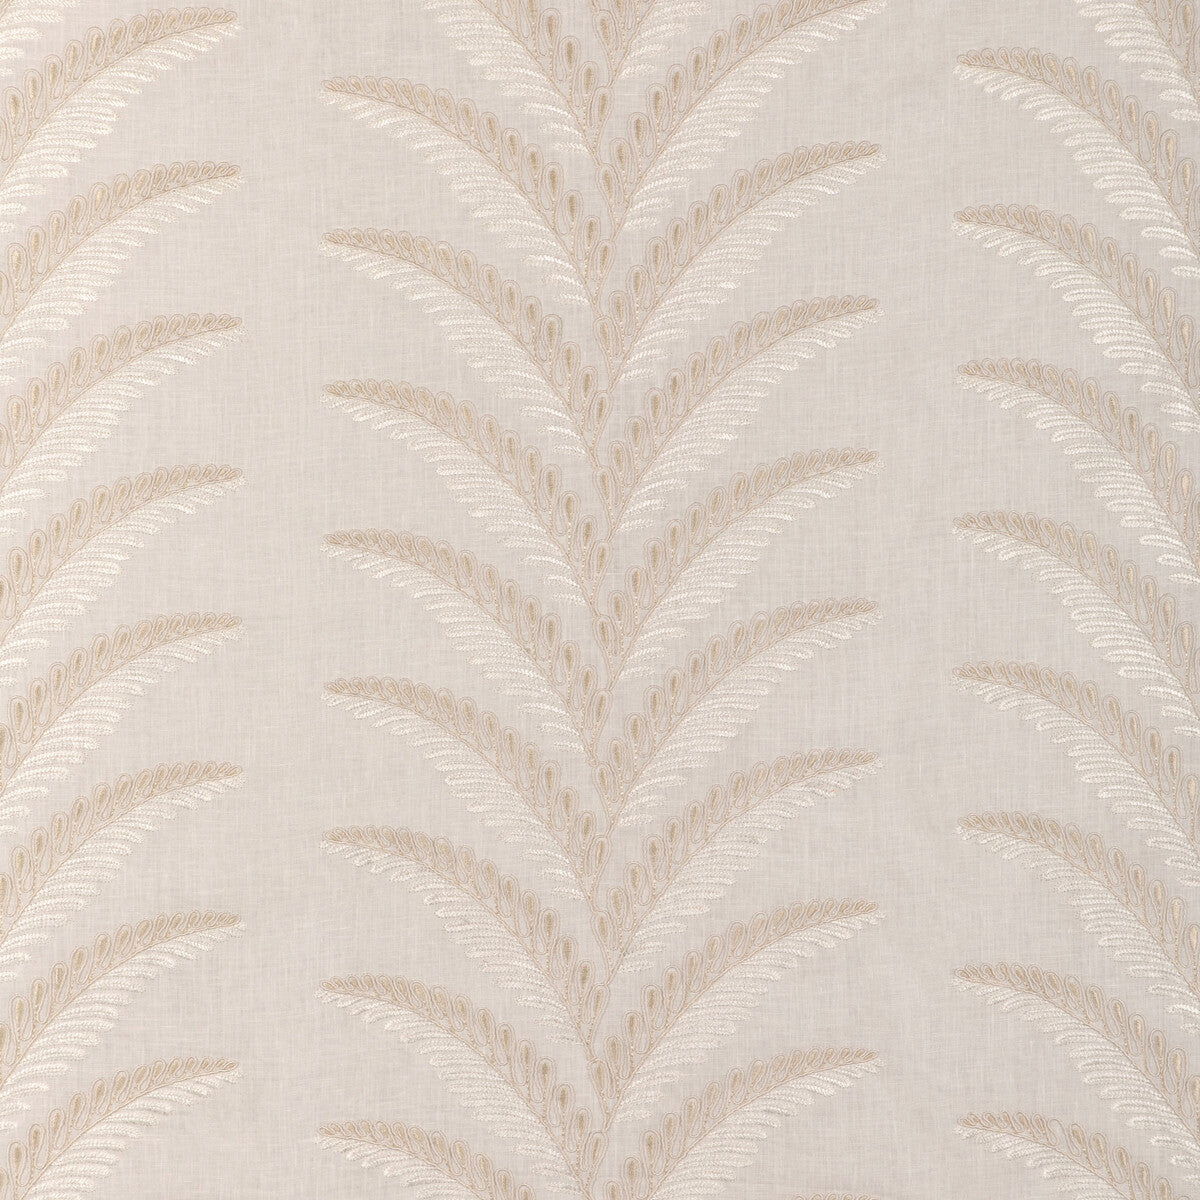 Fougere Emb fabric in cream color - pattern 8024109.16.0 - by Brunschwig &amp; Fils in the La Menagerie collection